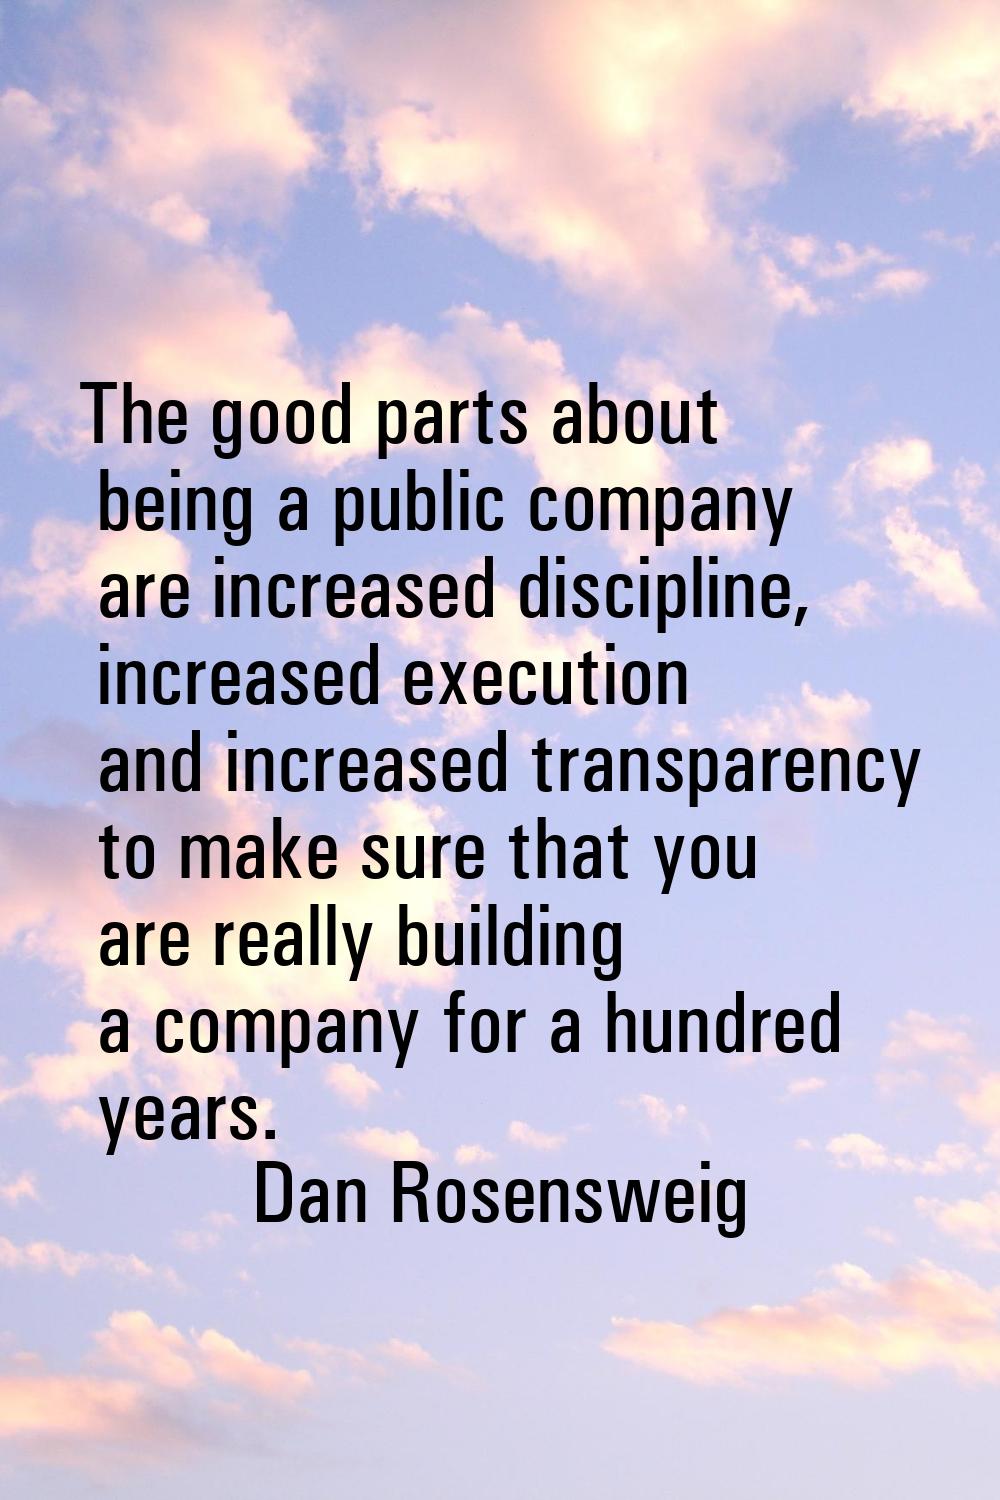 The good parts about being a public company are increased discipline, increased execution and incre